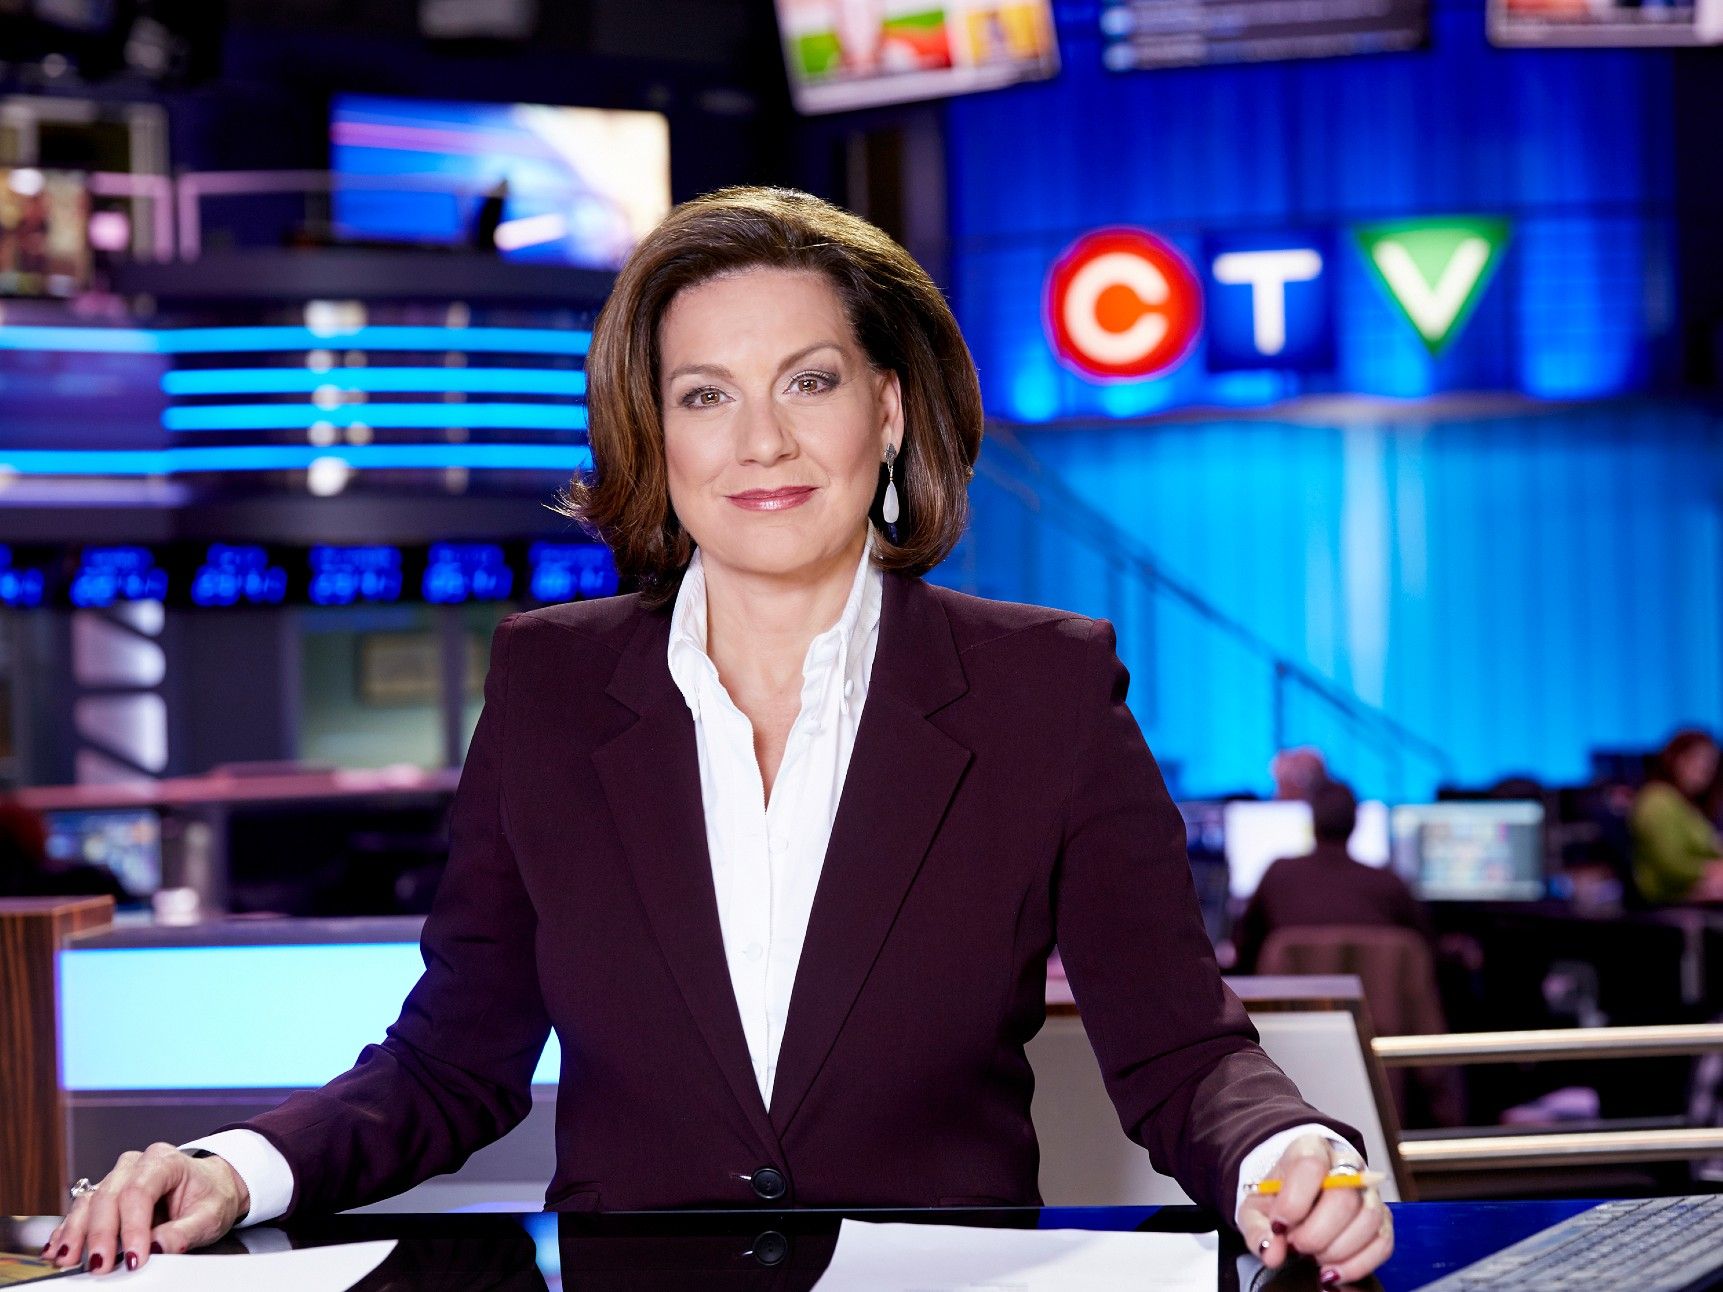 News anchor Lisa LaFlamme ‘shocked’ after CTV replaces her with Omar Sachedina